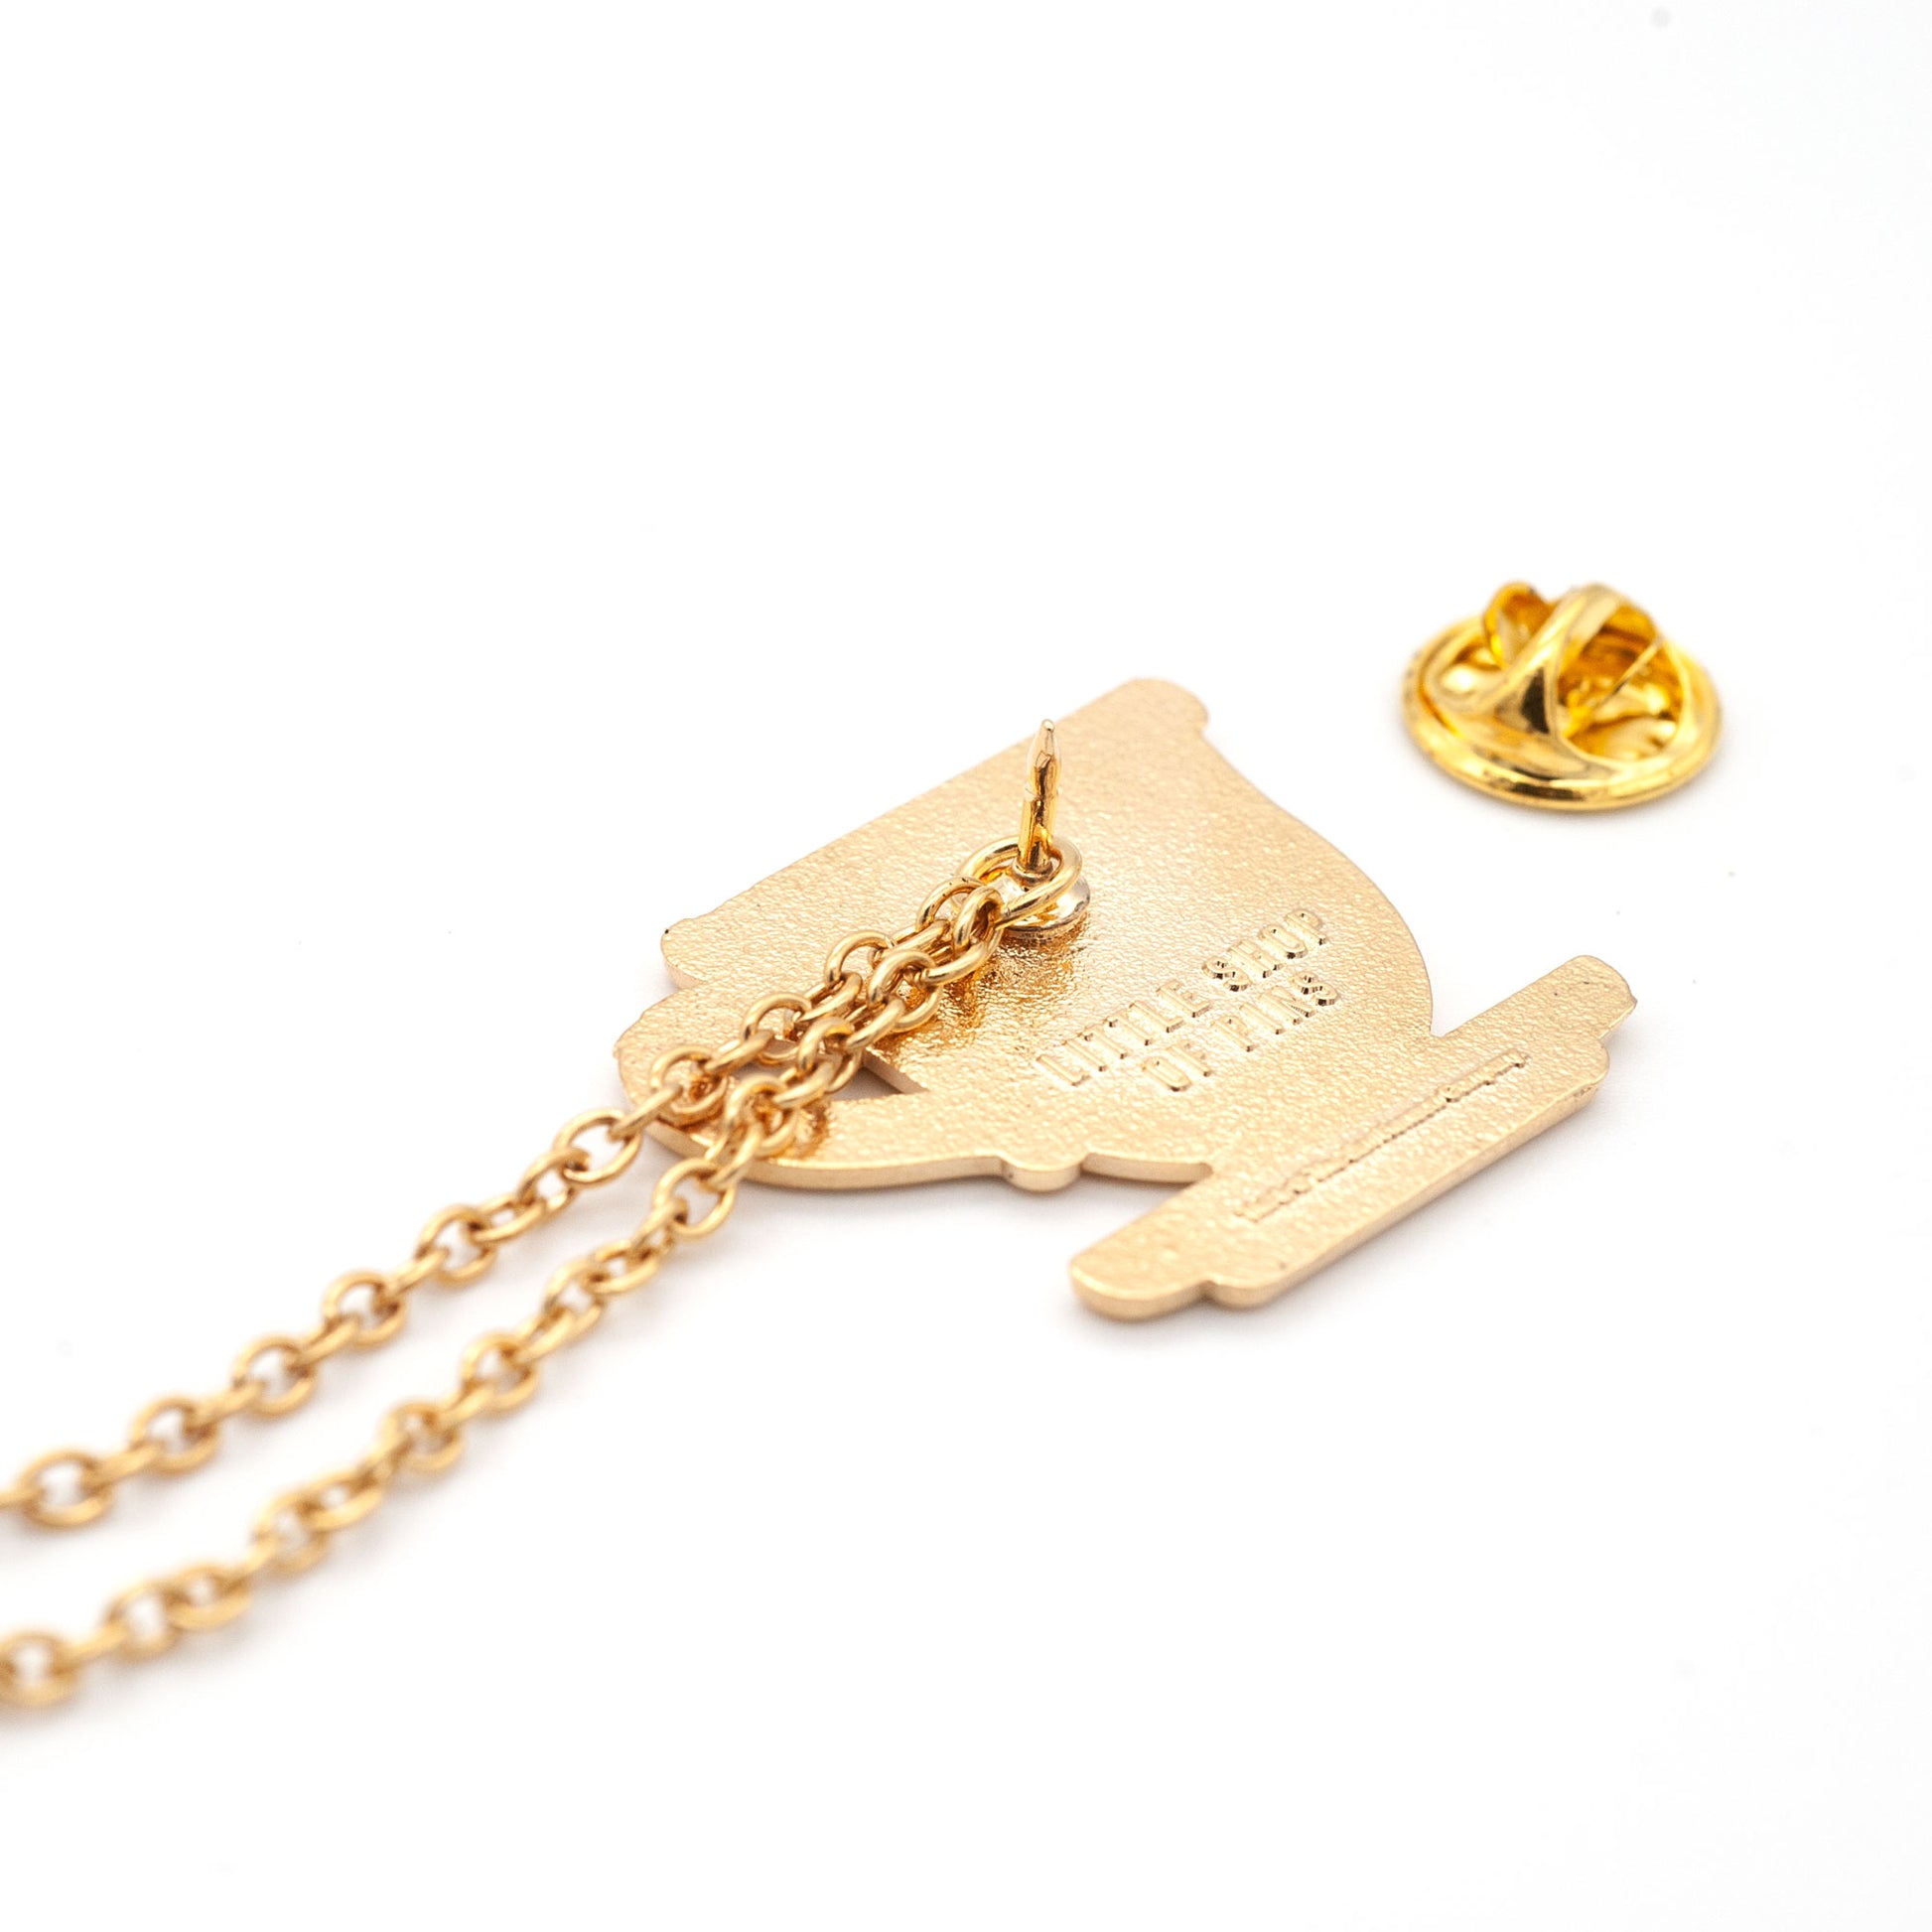 back of teacup pin, showing how the gold chains can attach to the post of the pin. 